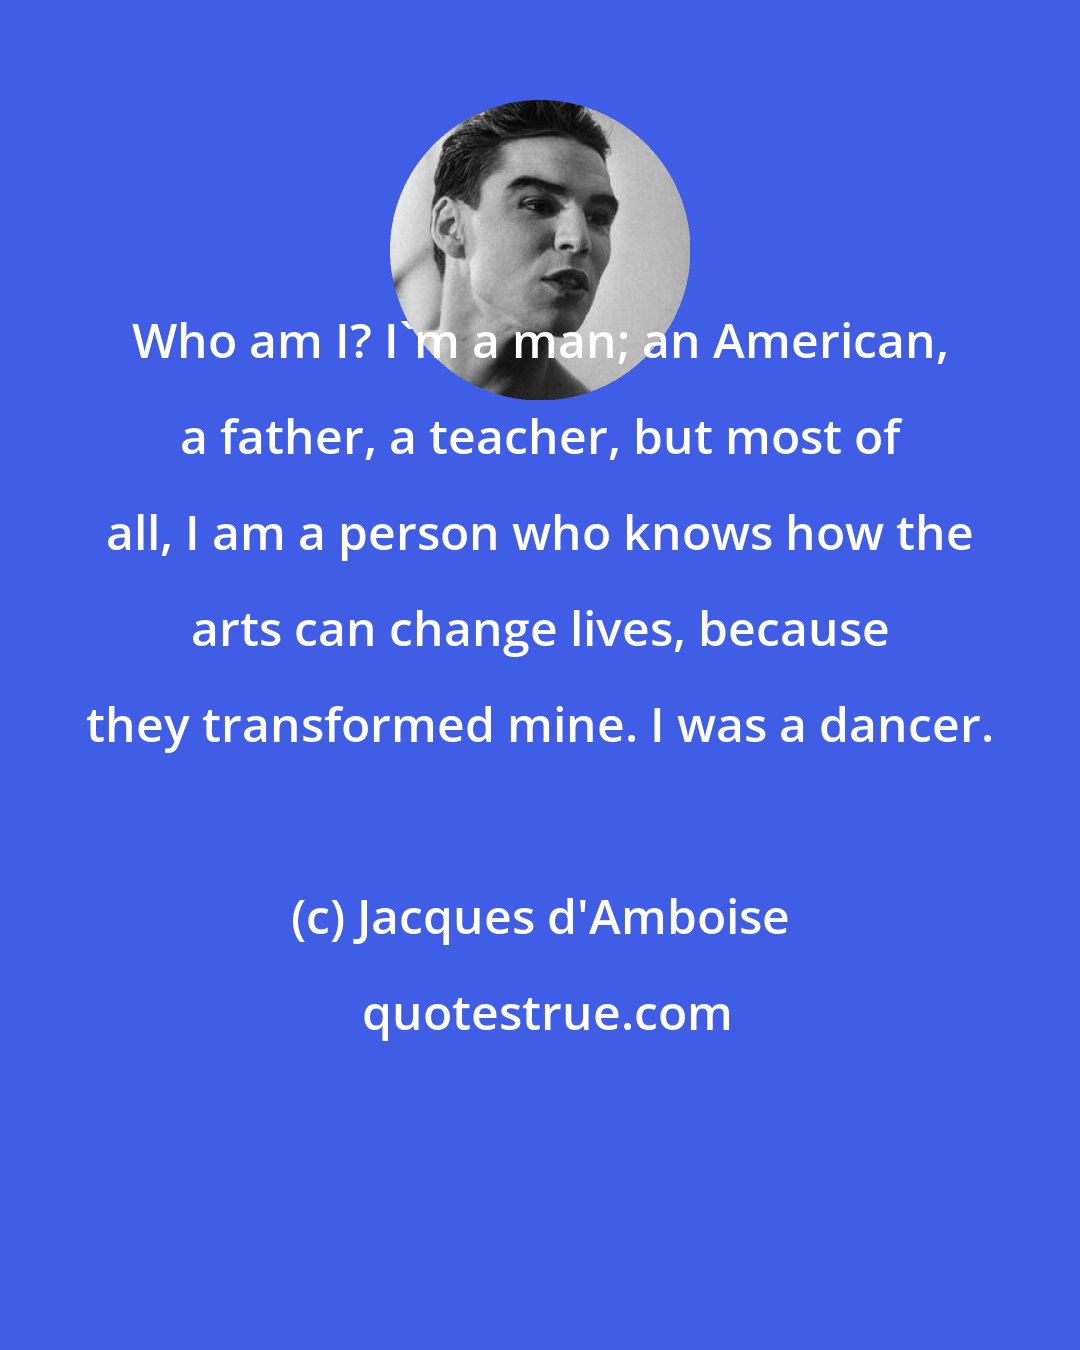 Jacques d'Amboise: Who am I? I'm a man; an American, a father, a teacher, but most of all, I am a person who knows how the arts can change lives, because they transformed mine. I was a dancer.